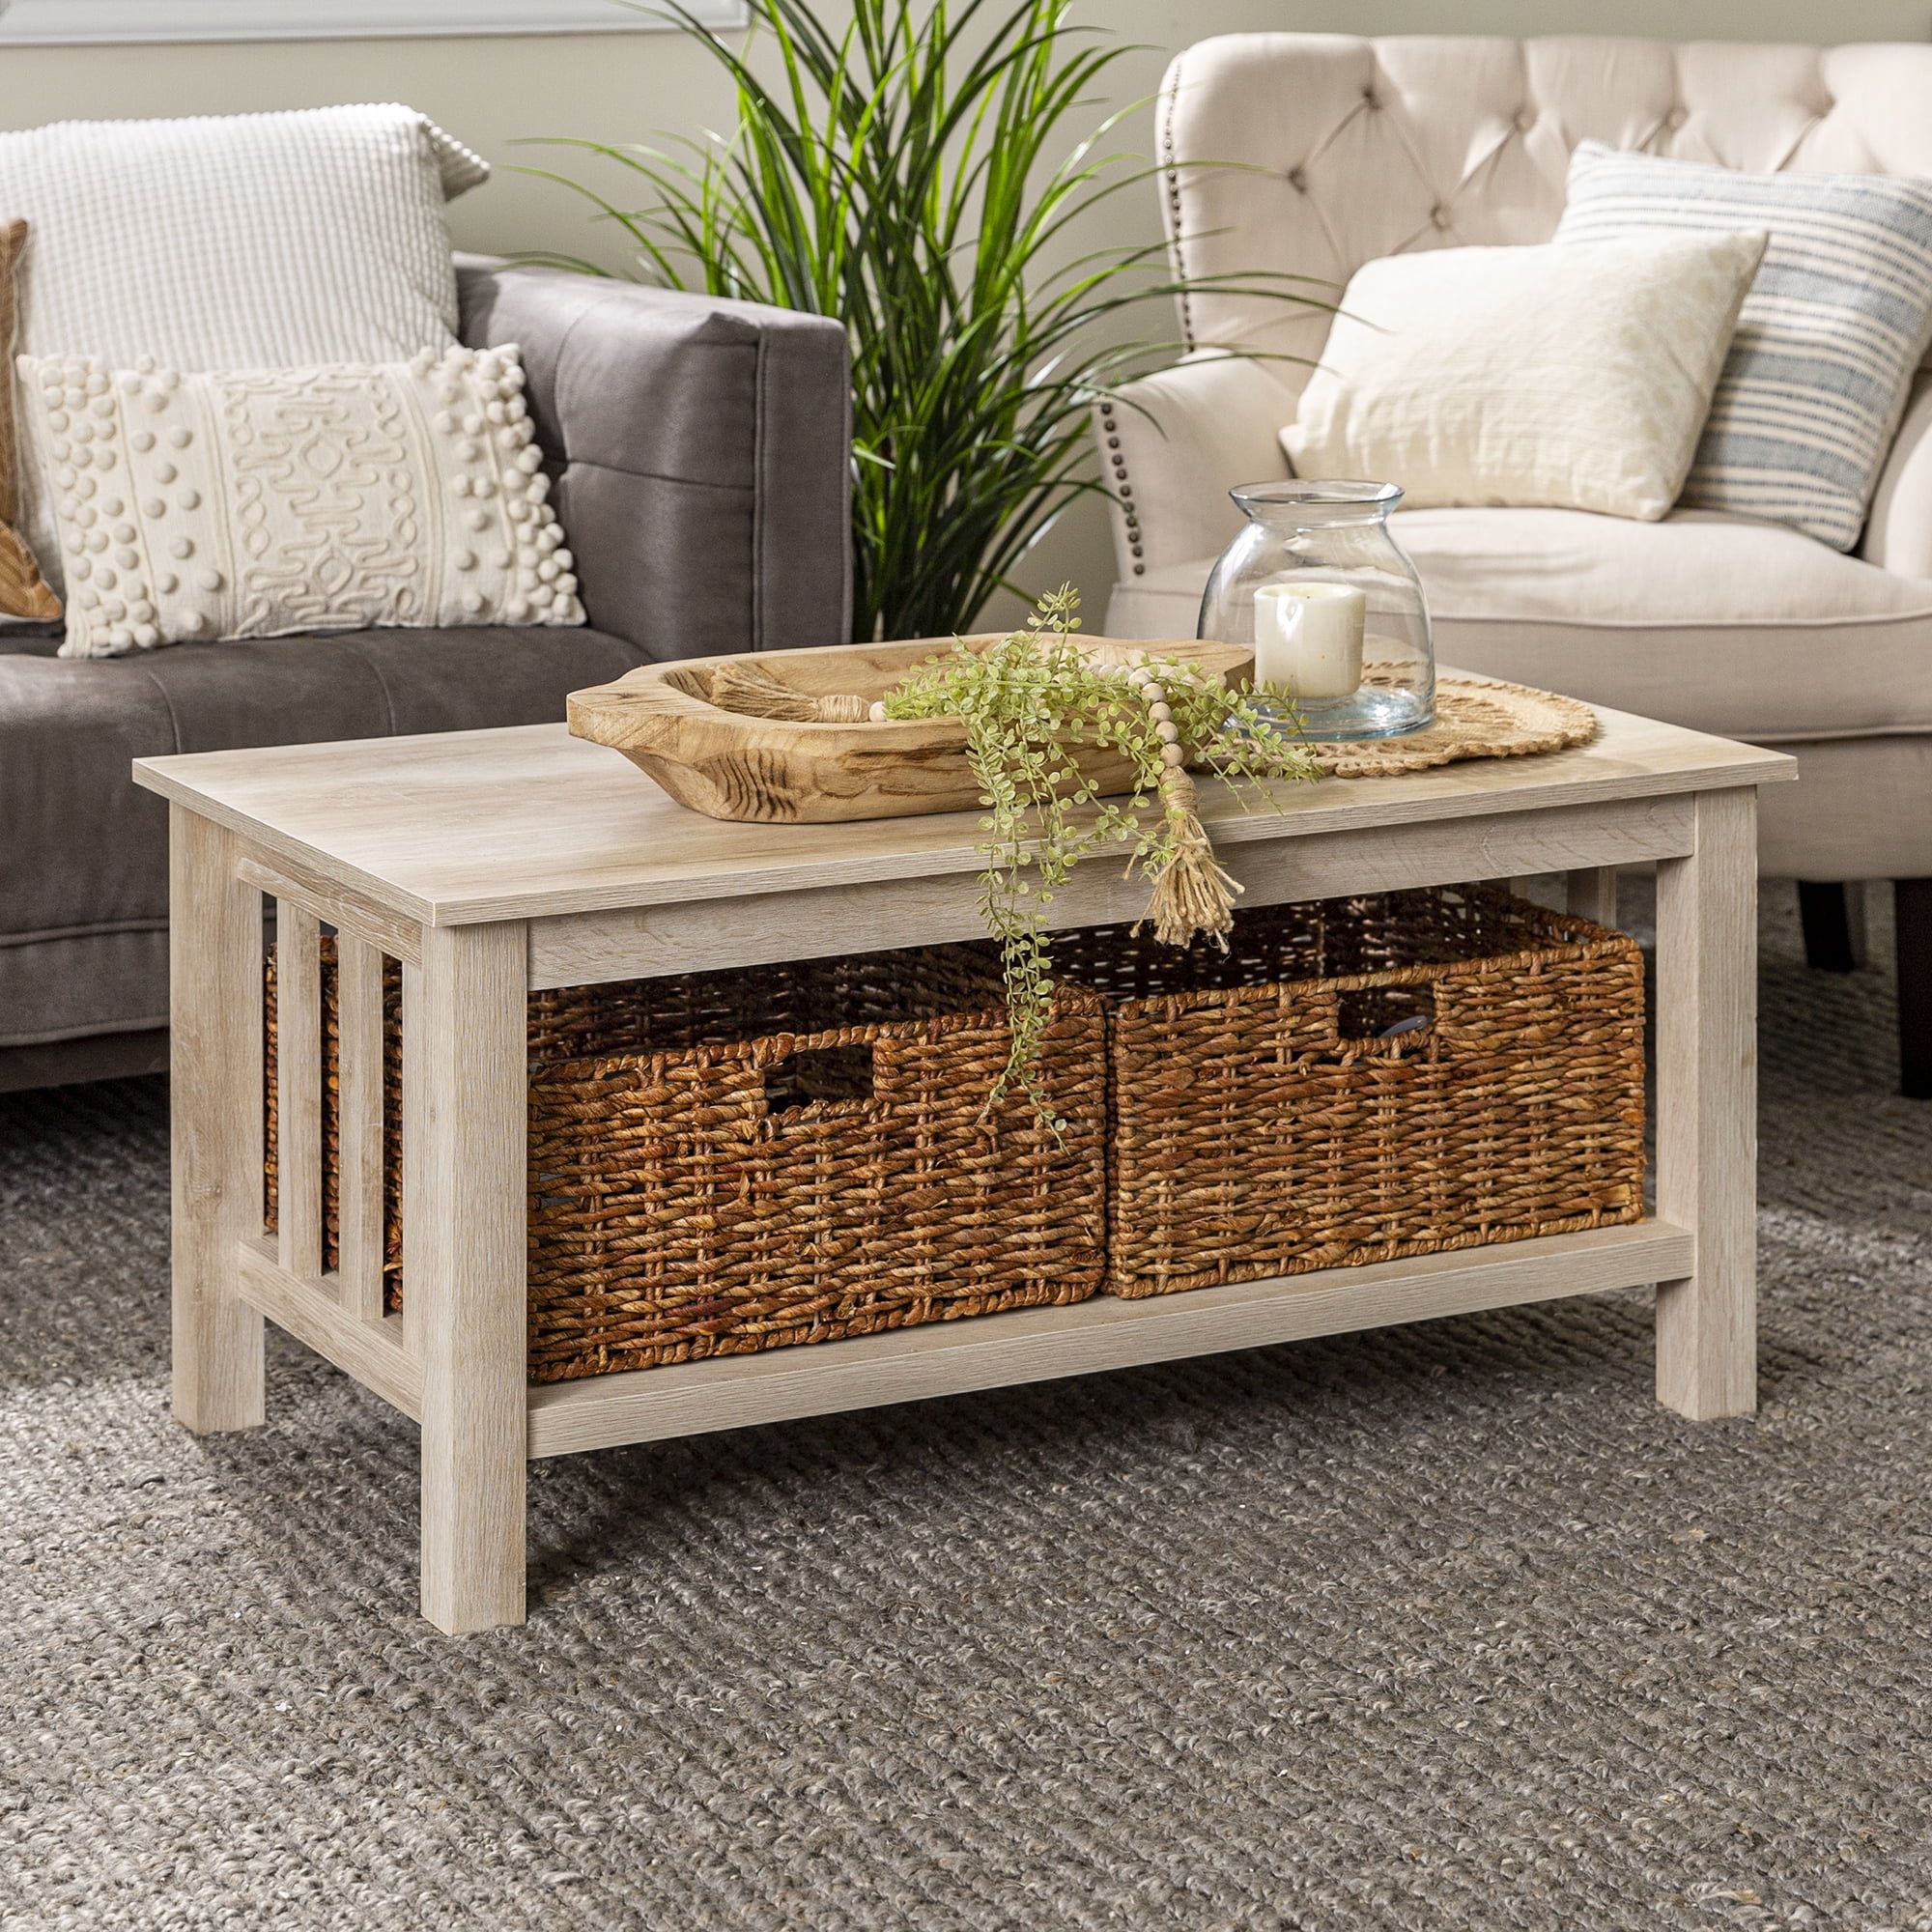 Woven Paths Traditional Storage Coffee Table With Bins, White Oak For Coffee Tables With Storage (View 5 of 15)